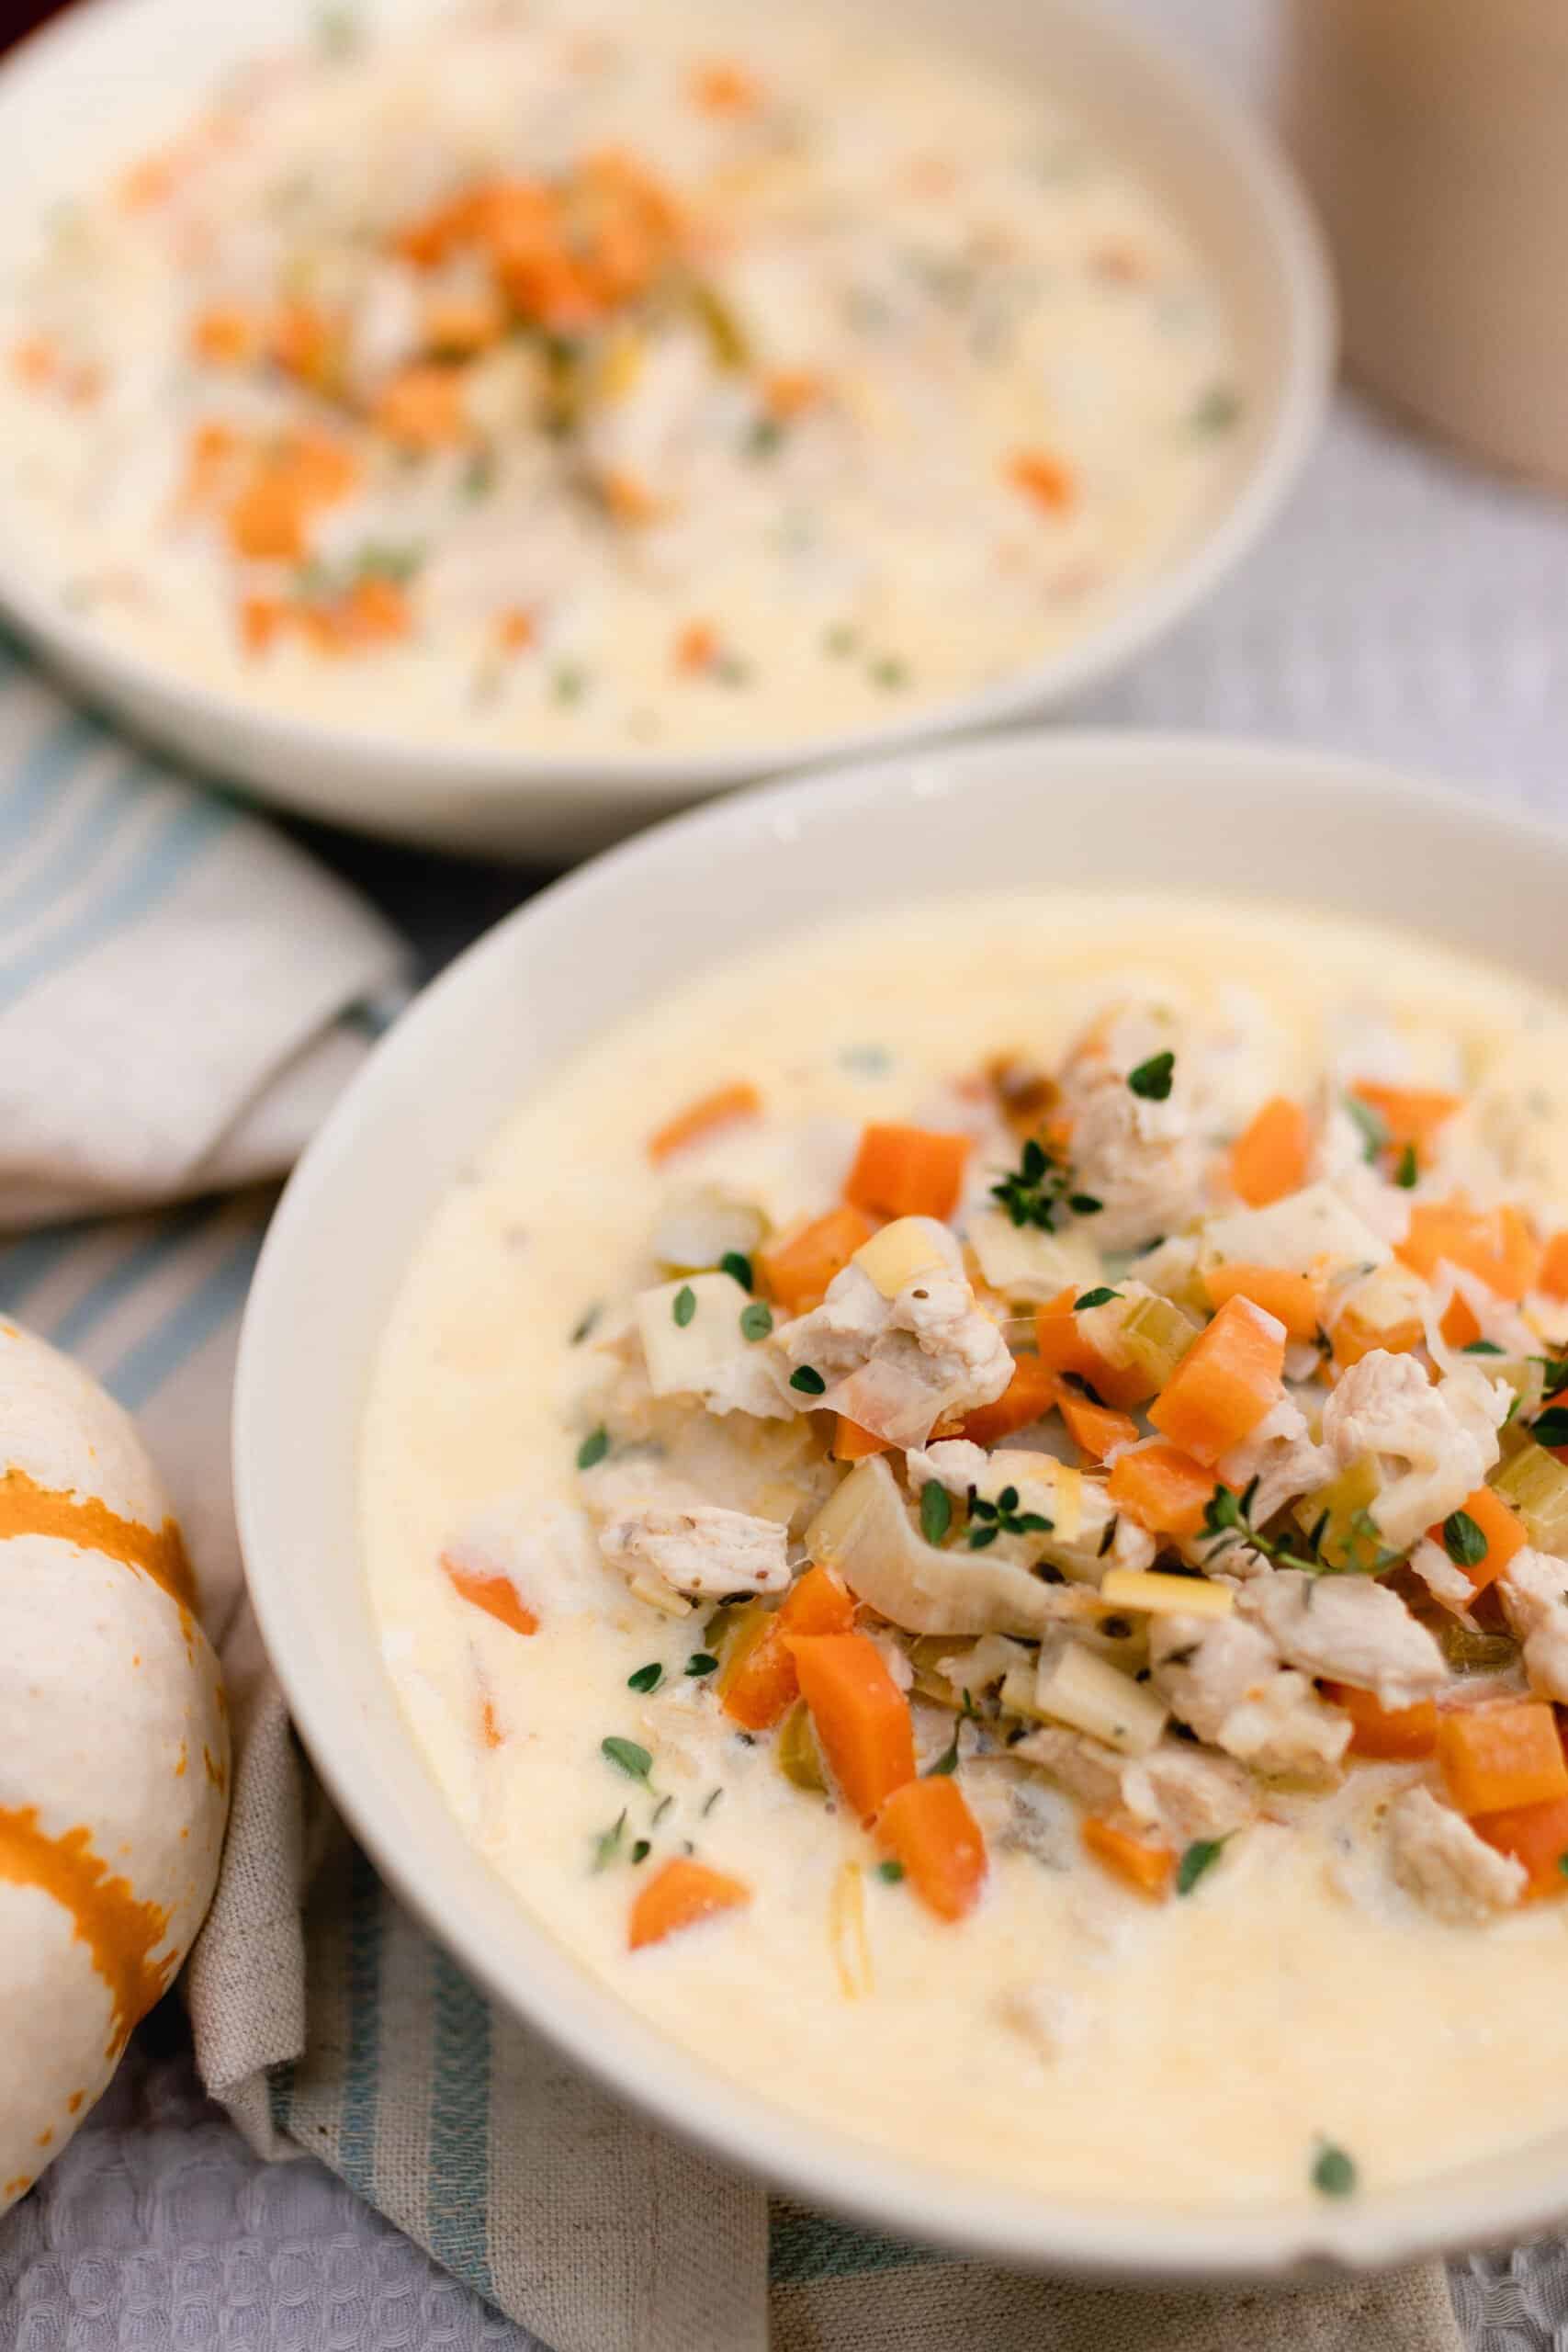 https://www.farmhouseonboone.com/wp-content/uploads/2020/10/creamy-chicken-soup-13-scaled.jpg